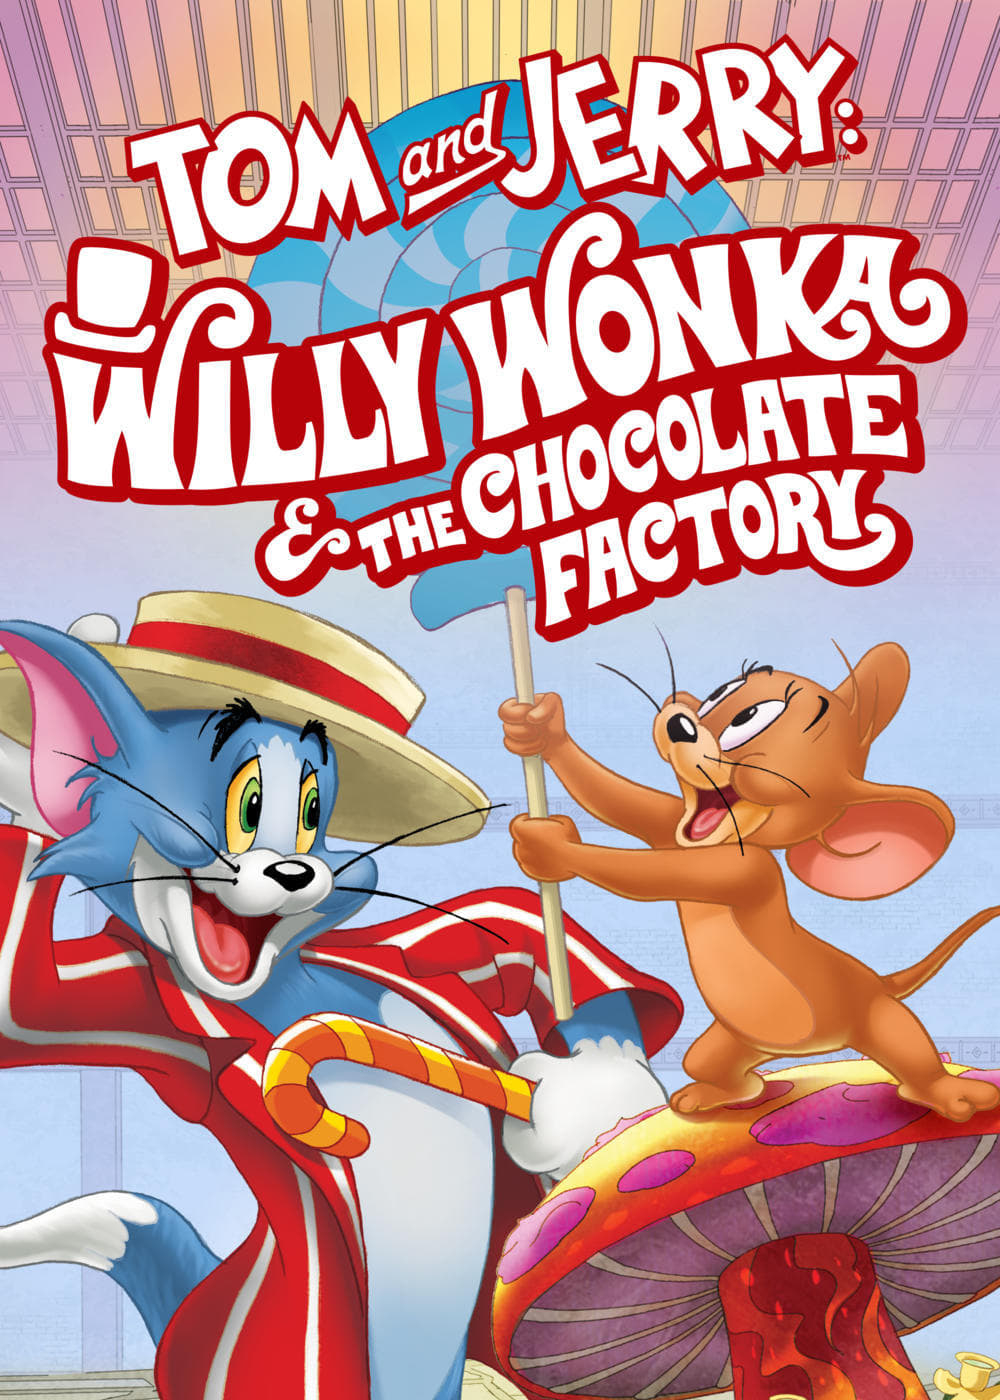 Xem Phim Tom and Jerry: Willy Wonka and the Chocolate Factory (Tom and Jerry: Willy Wonka and the Chocolate Factory)